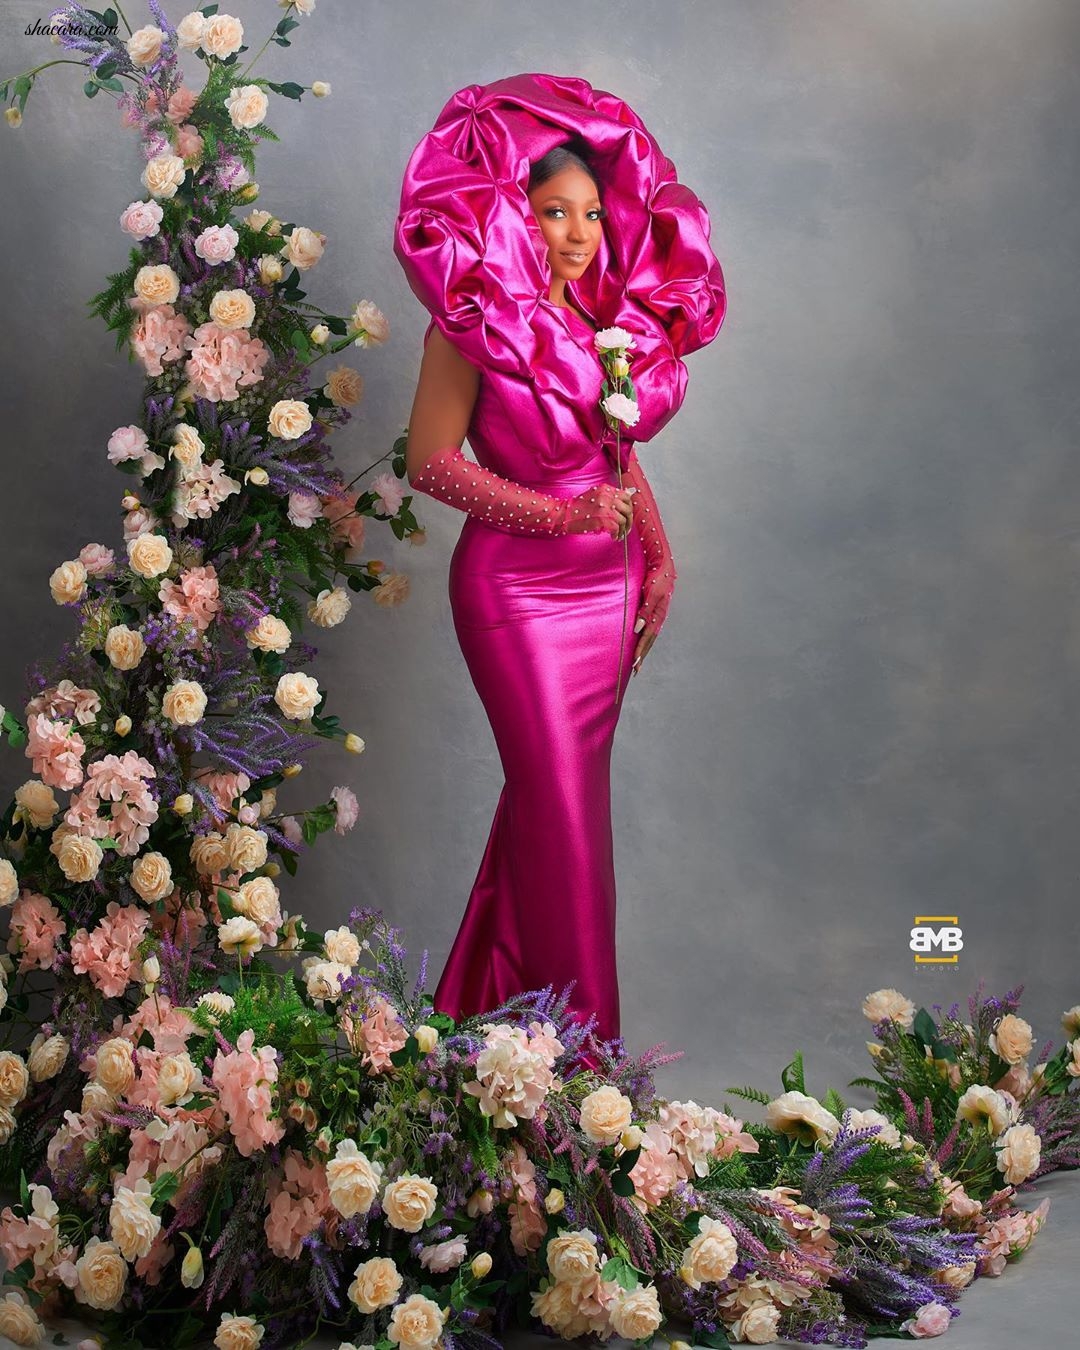 Of Course Omowunmi Dada Rang In Her Birthday With A Photoshoot Extravaganza